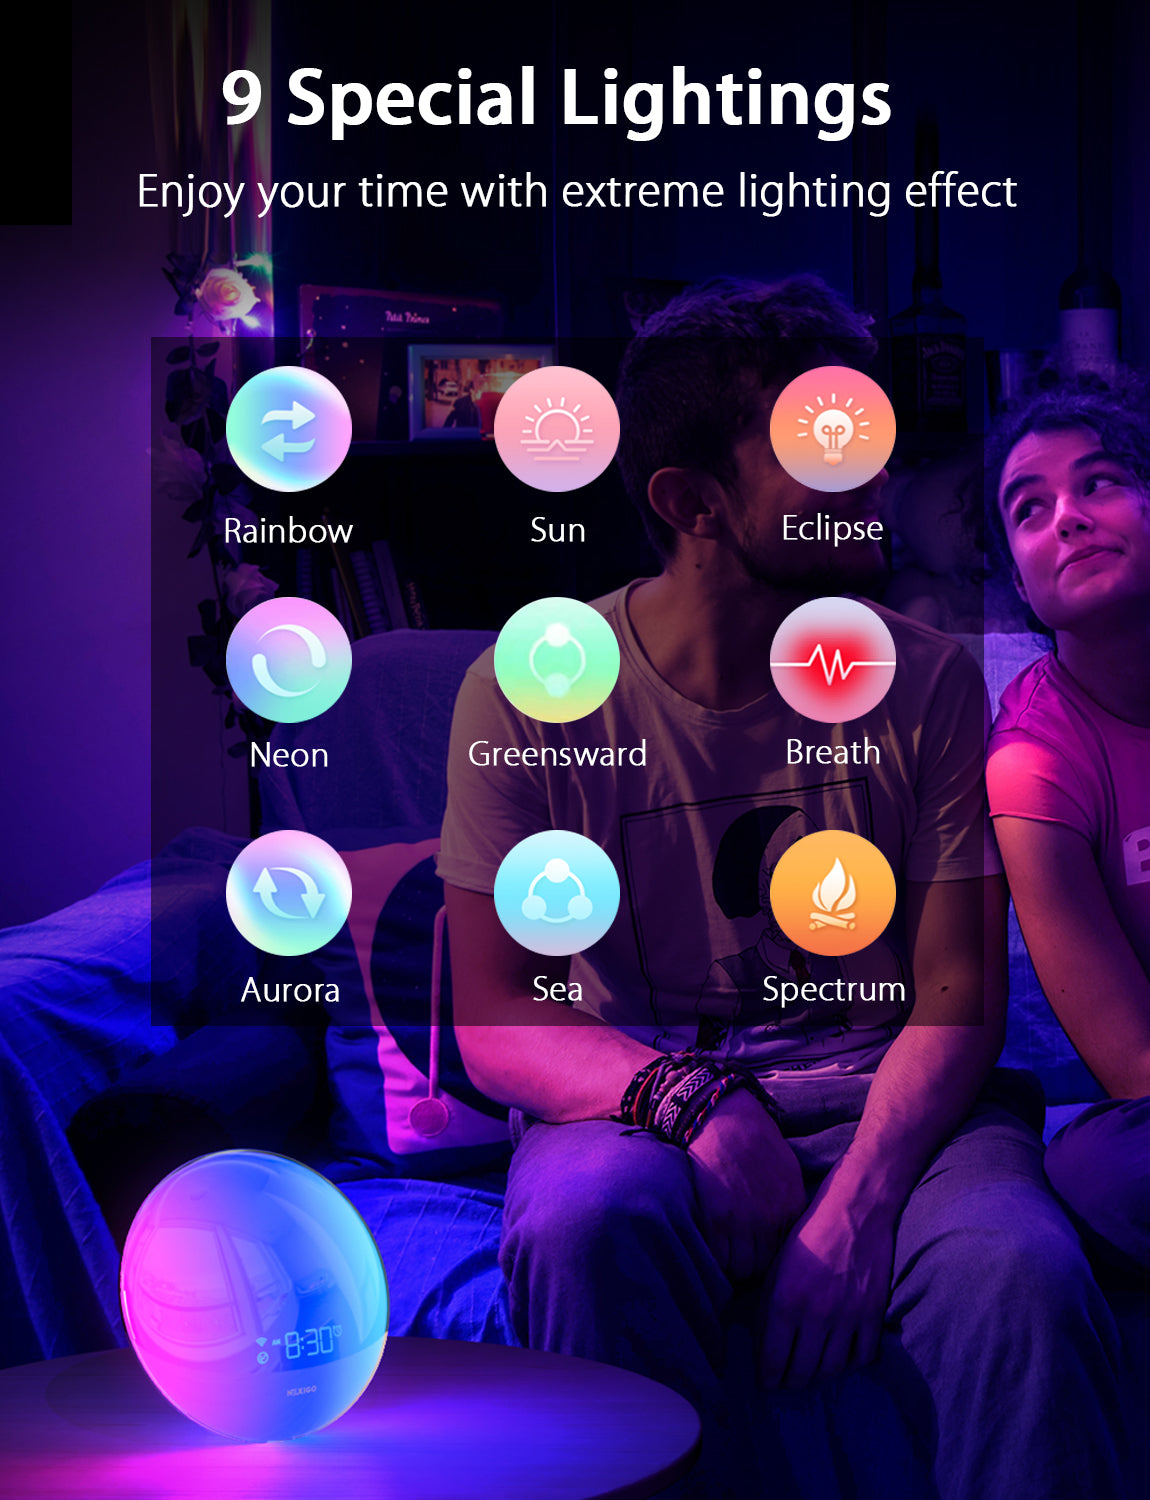 Alarm Clock with 9 light effects, including Rainbow, Neon, Aurora, Sun, Greensward, and more.